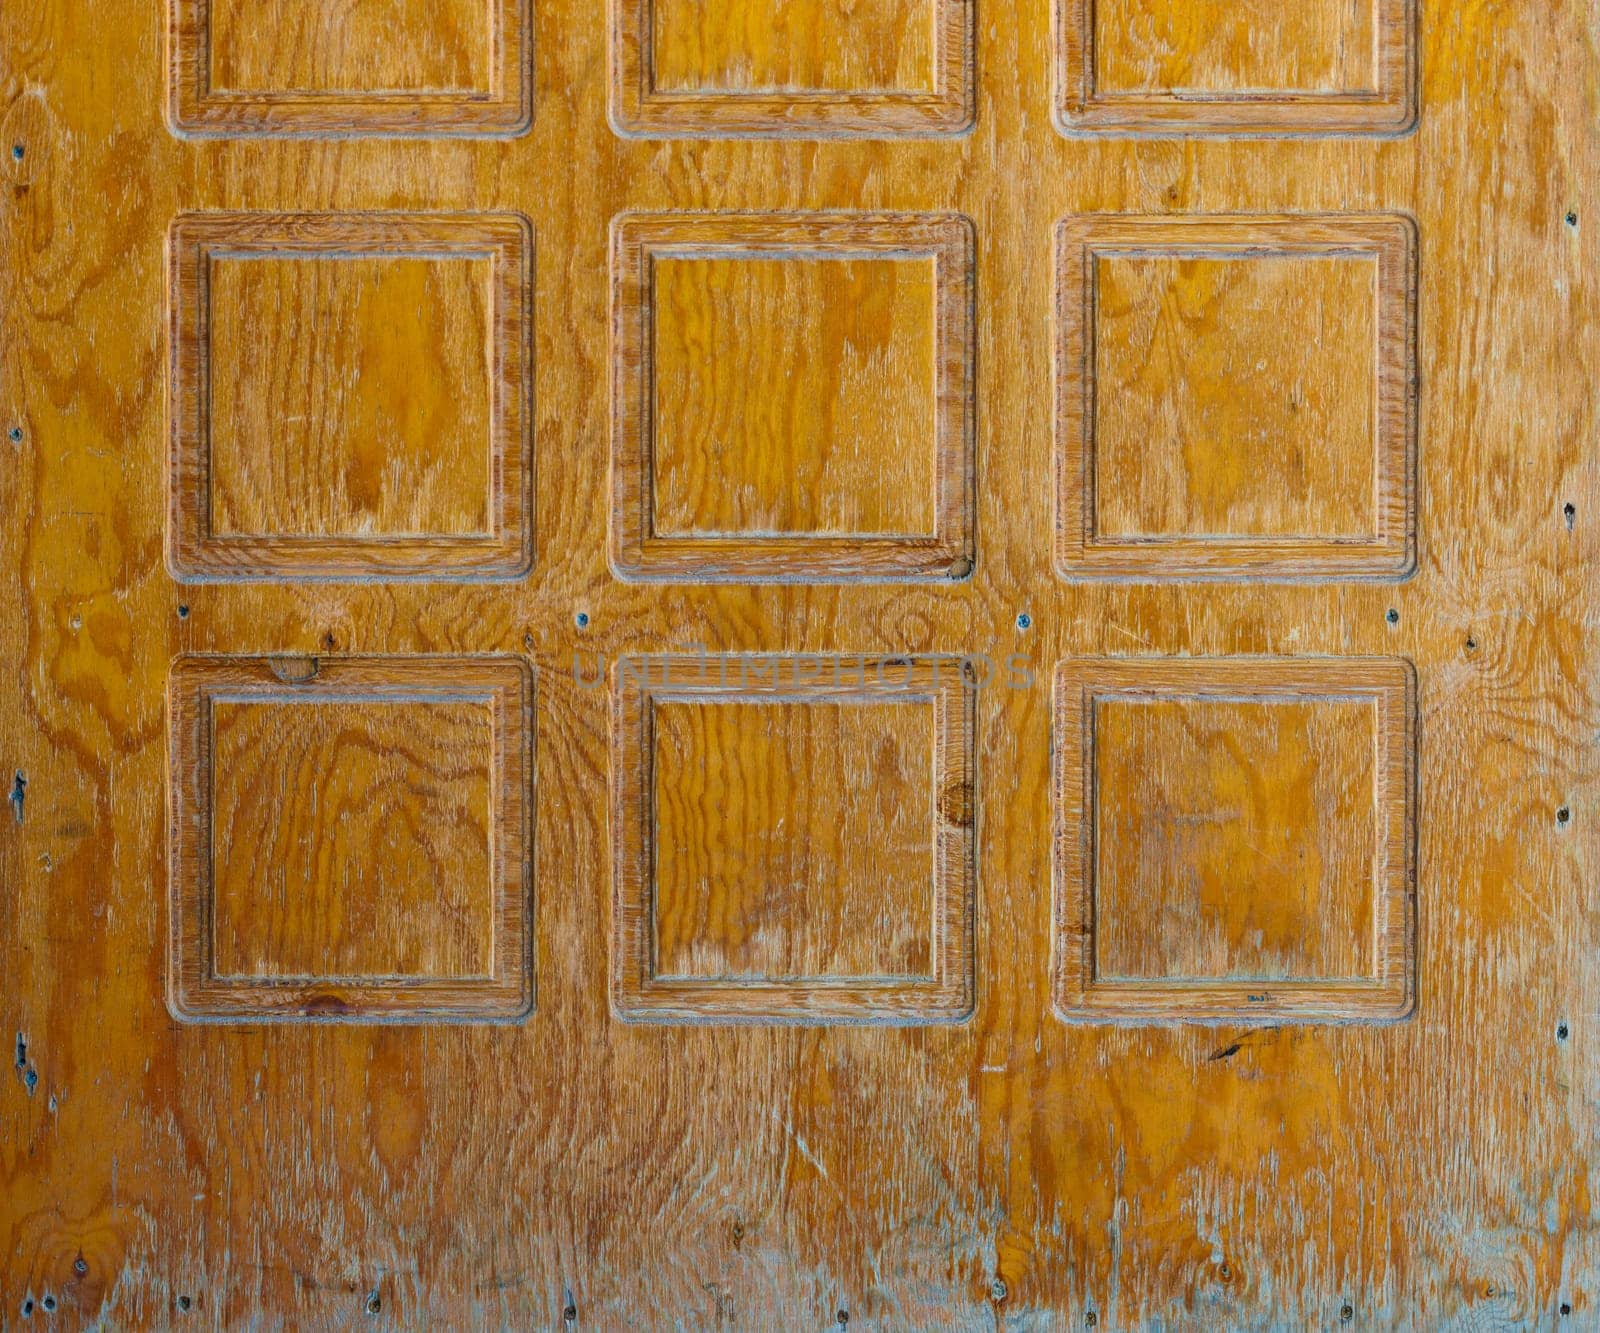 Brown plywood door texture with square decorative recessions carved into it